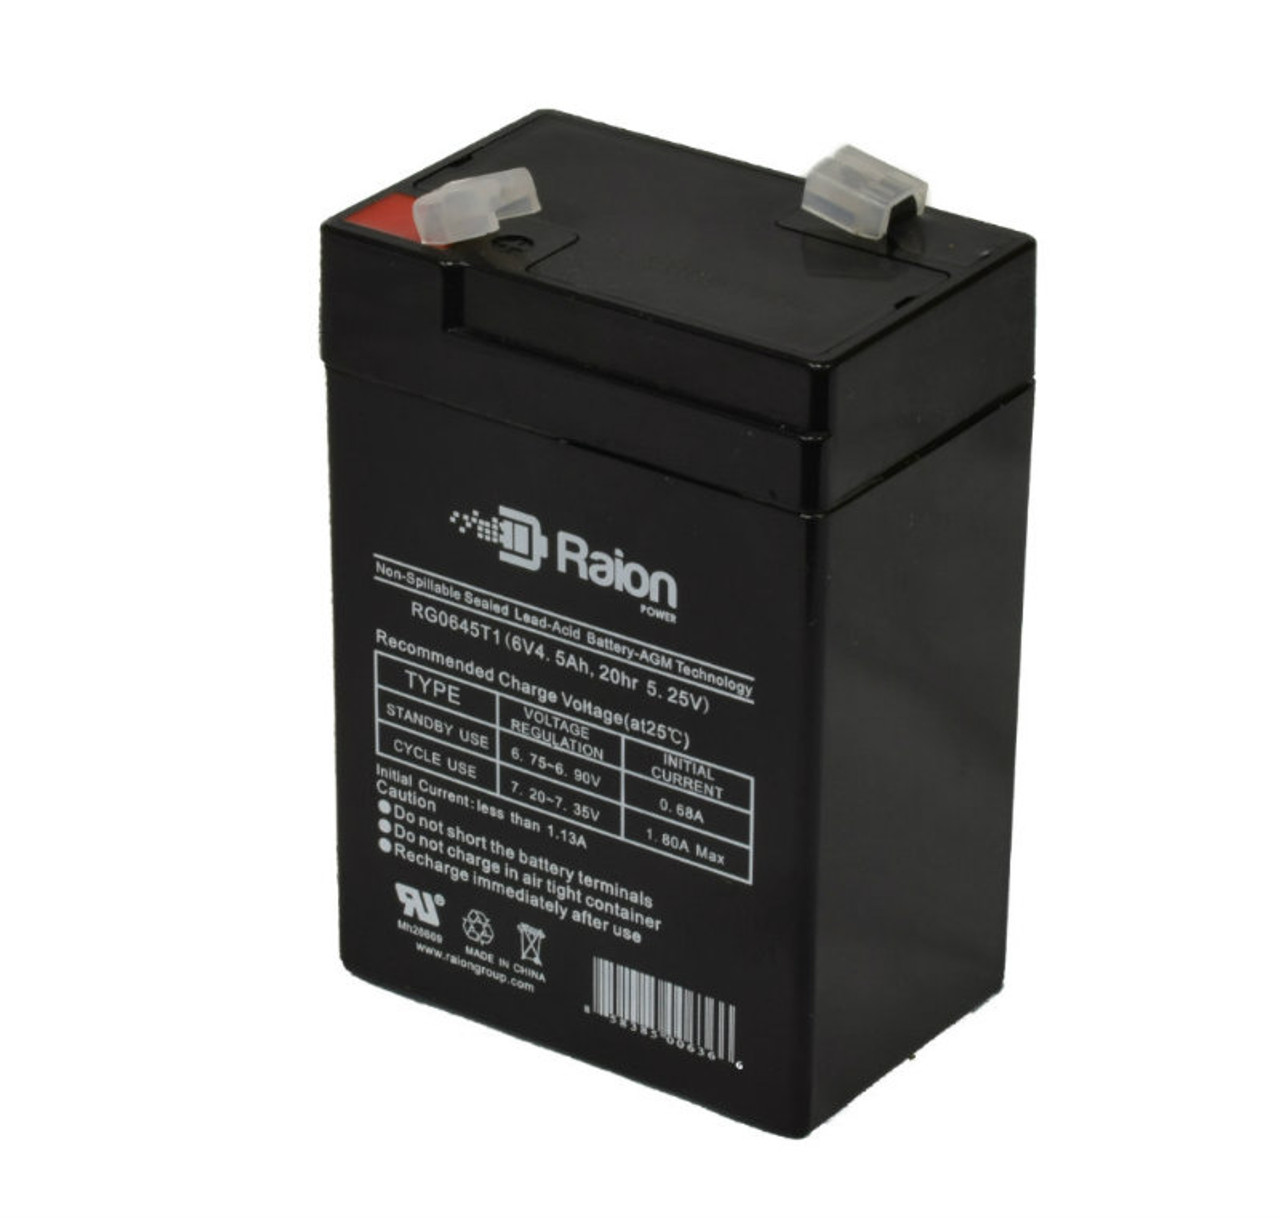 Raion Power RG0645T1 6V 4.5Ah Replacement Battery Cartridge for LONG WP4-6